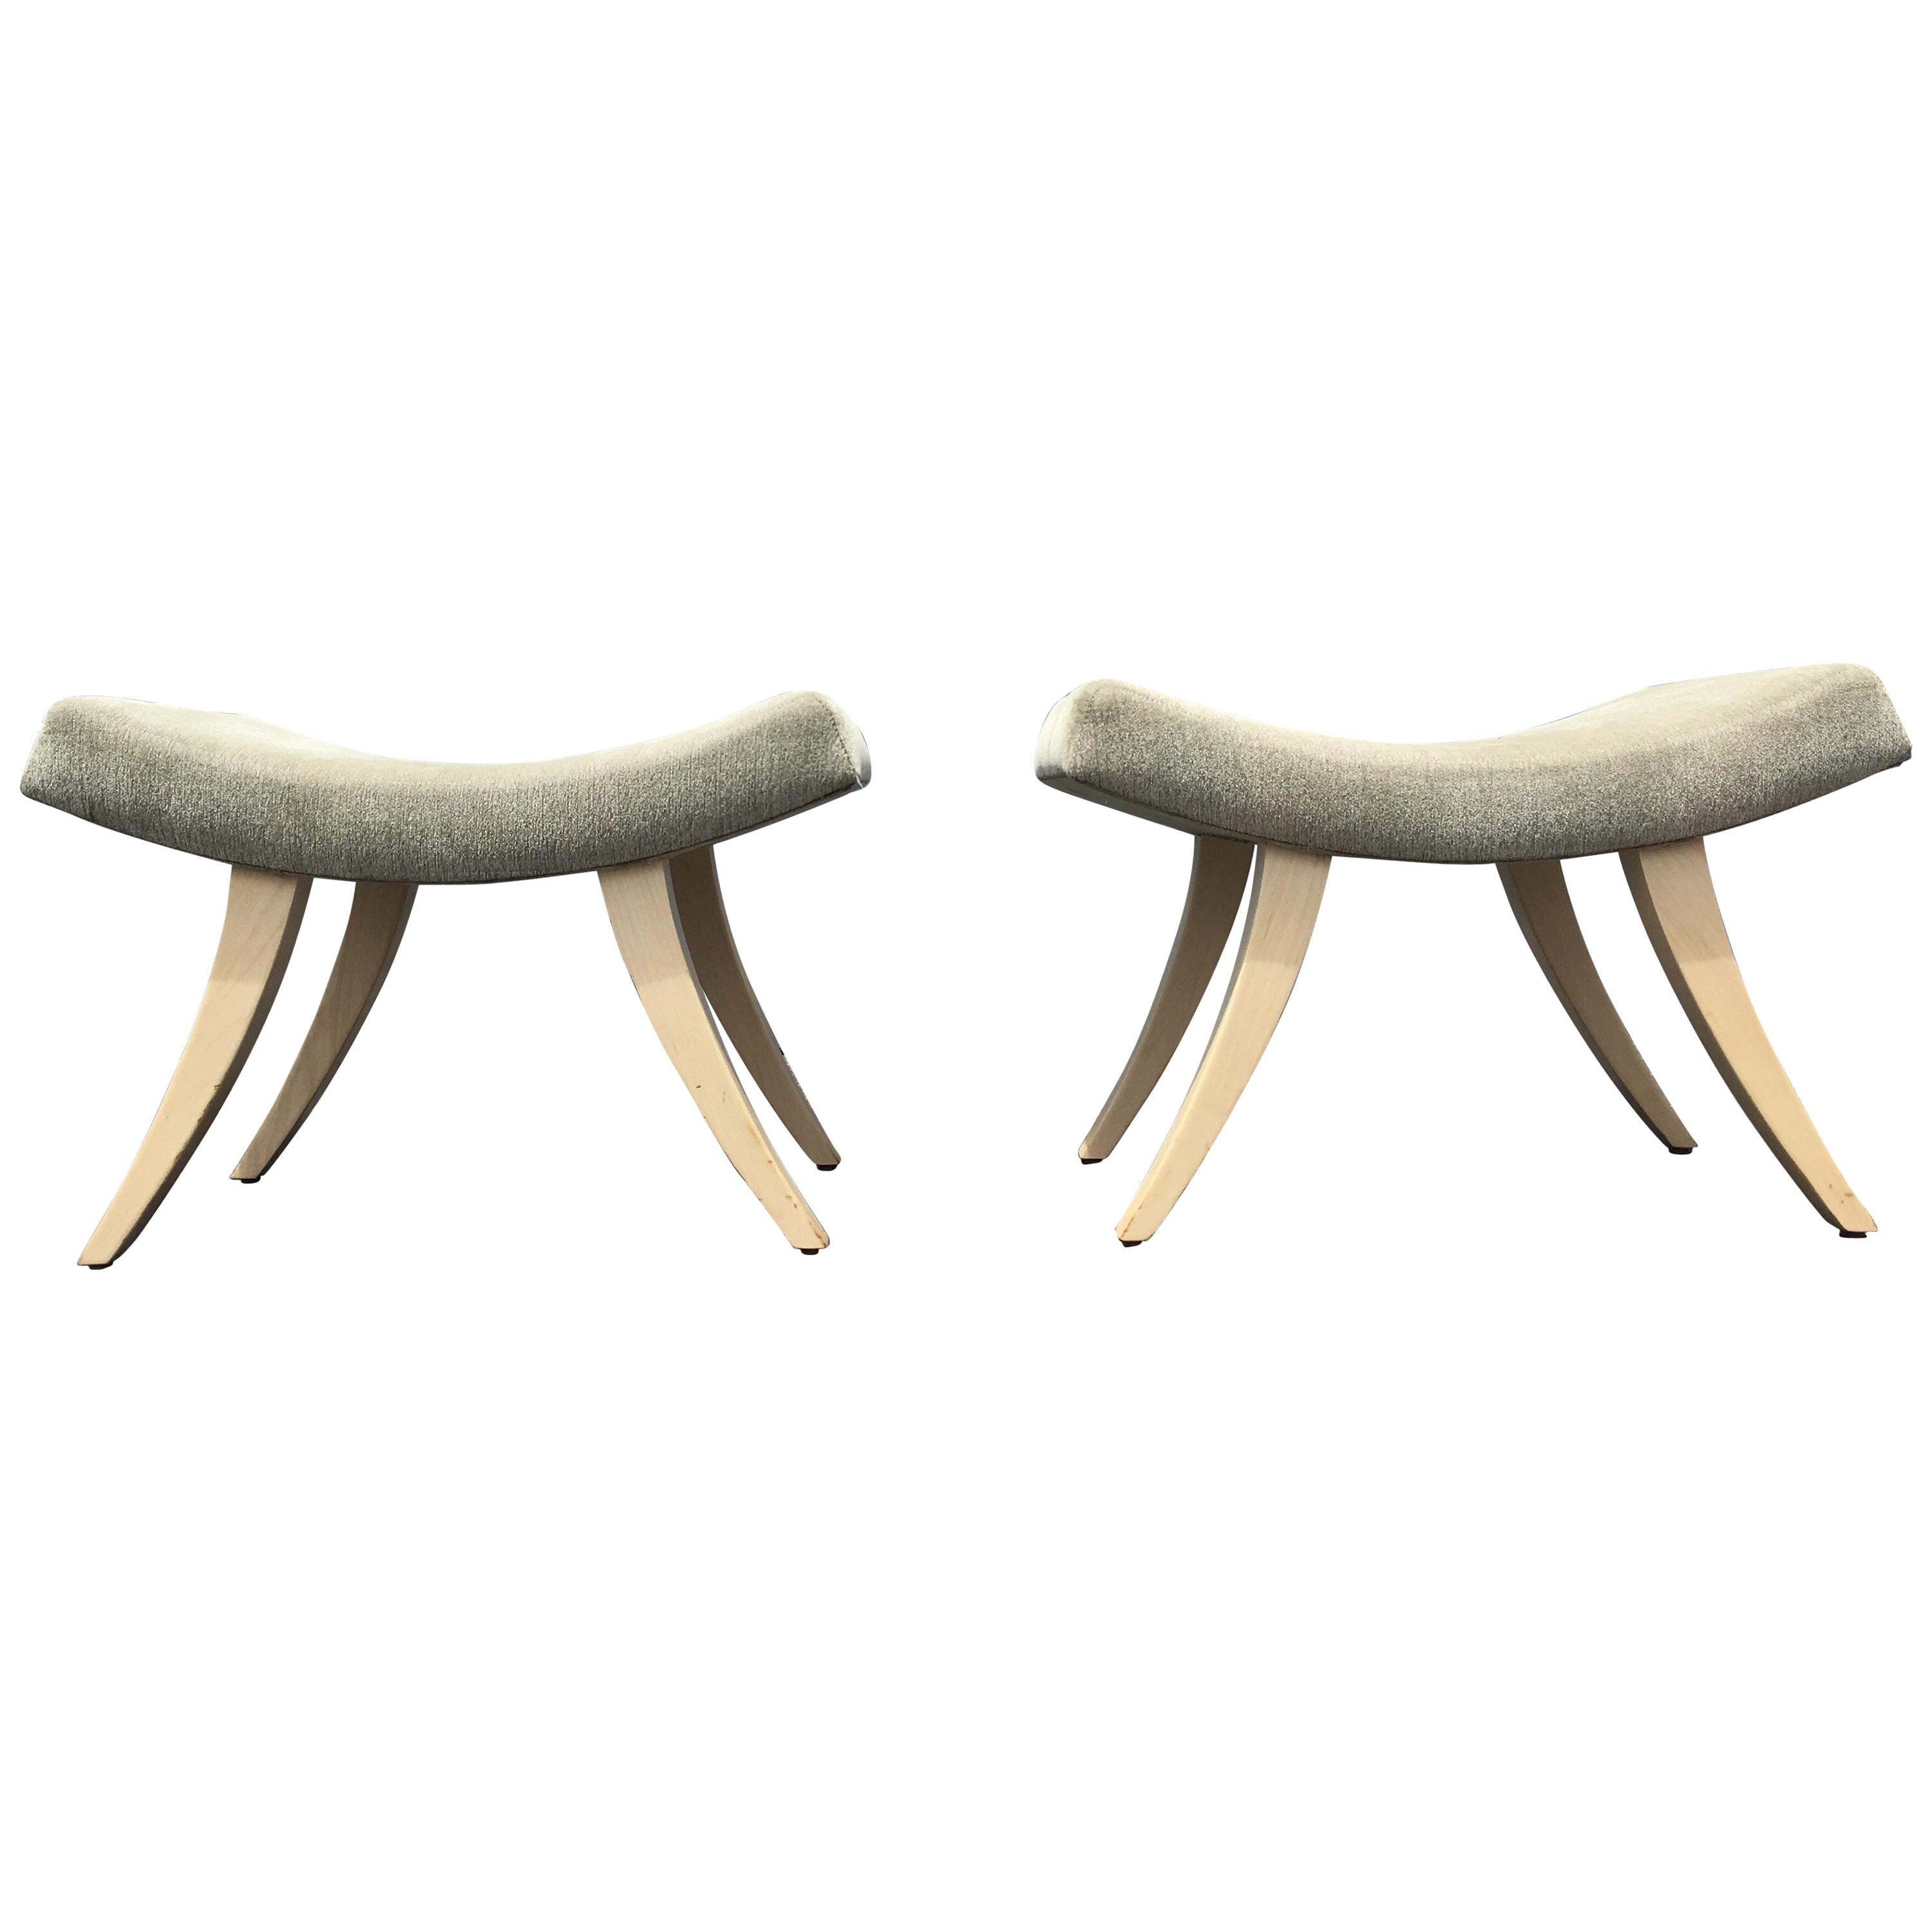 Pair of Modern Ottomans or Stools with Saber Legs